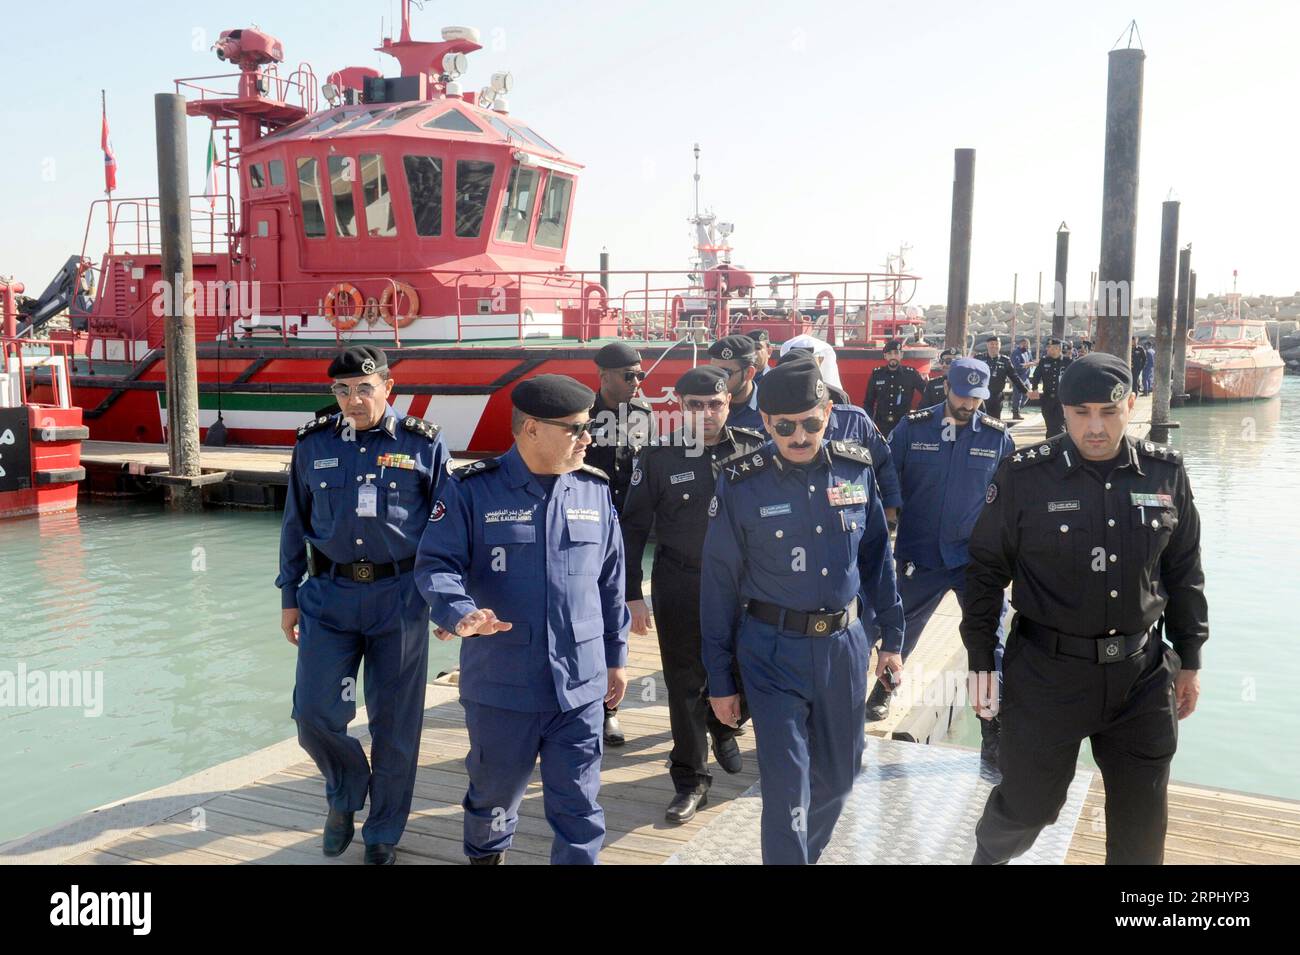 191120 -- HAWALLI GOVERNORATE, Nov. 20, 2019 Xinhua -- Director-General of Kuwait Fire Service Directorate KFSD Khaled Al-Mekrad C, Front inspects a new batch of naval boats in Hawalli Governorate, Kuwait, on Nov. 20, 2019. Kuwait Fire Service Directorate KFSD launched on Wednesday a new batch of naval boats with the latest navigational equipment to facilitate search and rescue operations, KFSD Director-General Khaled Al-Mekrad said. Xinhua KUWAIT-HAWALLI GOVERNORATE-NEW RESCUE BOATS PUBLICATIONxNOTxINxCHN Stock Photo